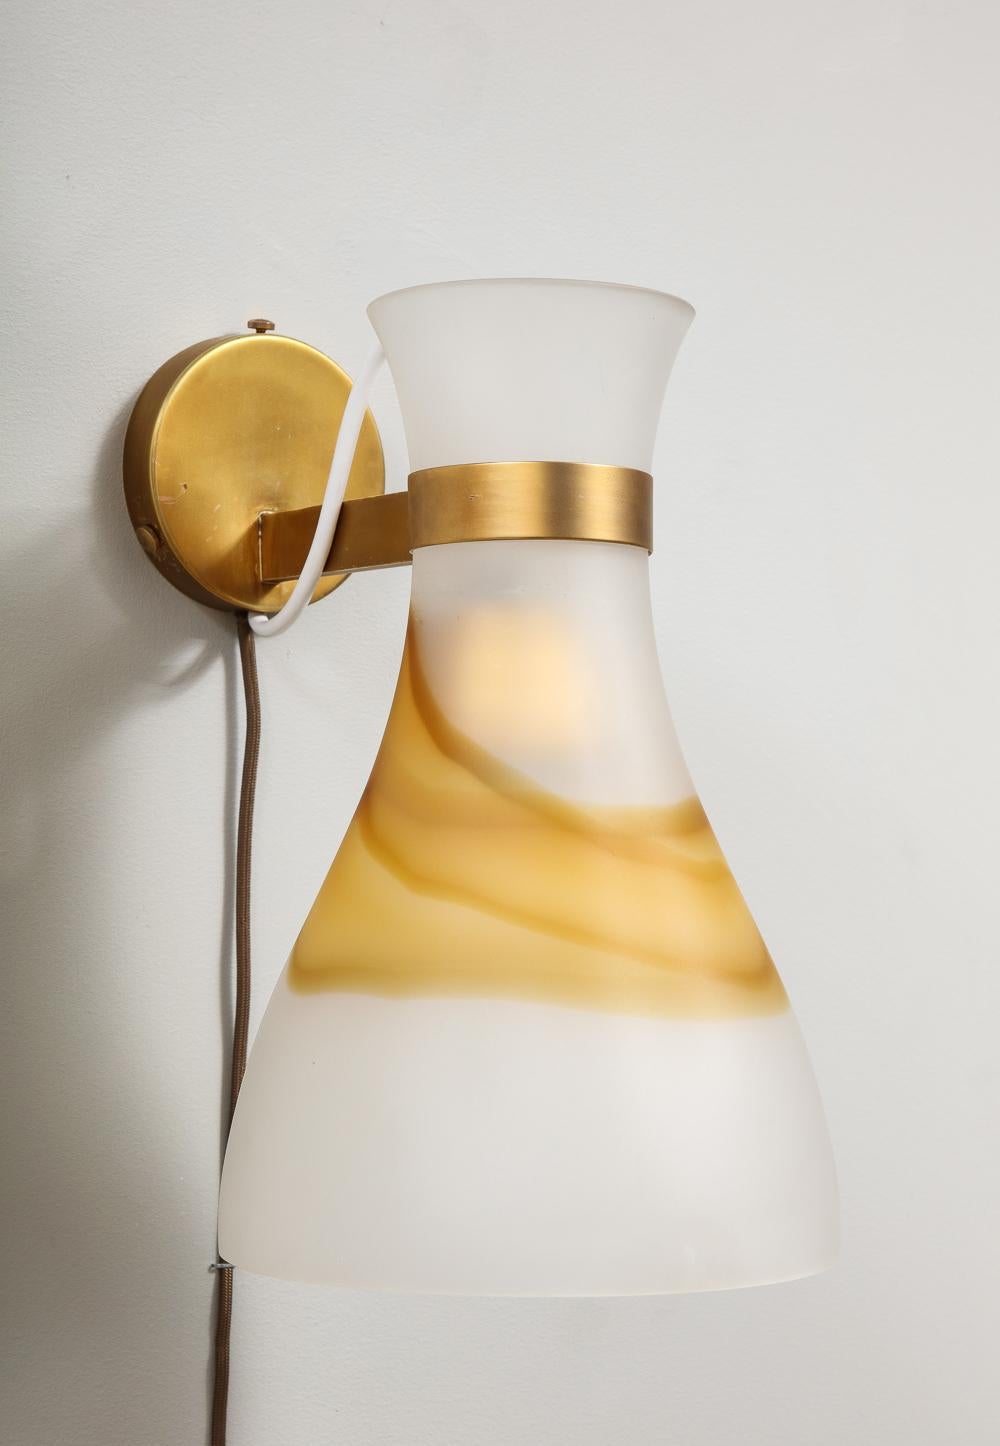 Hand blown glass, brass. Each fixture takes 1 E26 bulb. These lights can be re-oriented to point up as well. A third matching light is available. Price shown is for the pair.